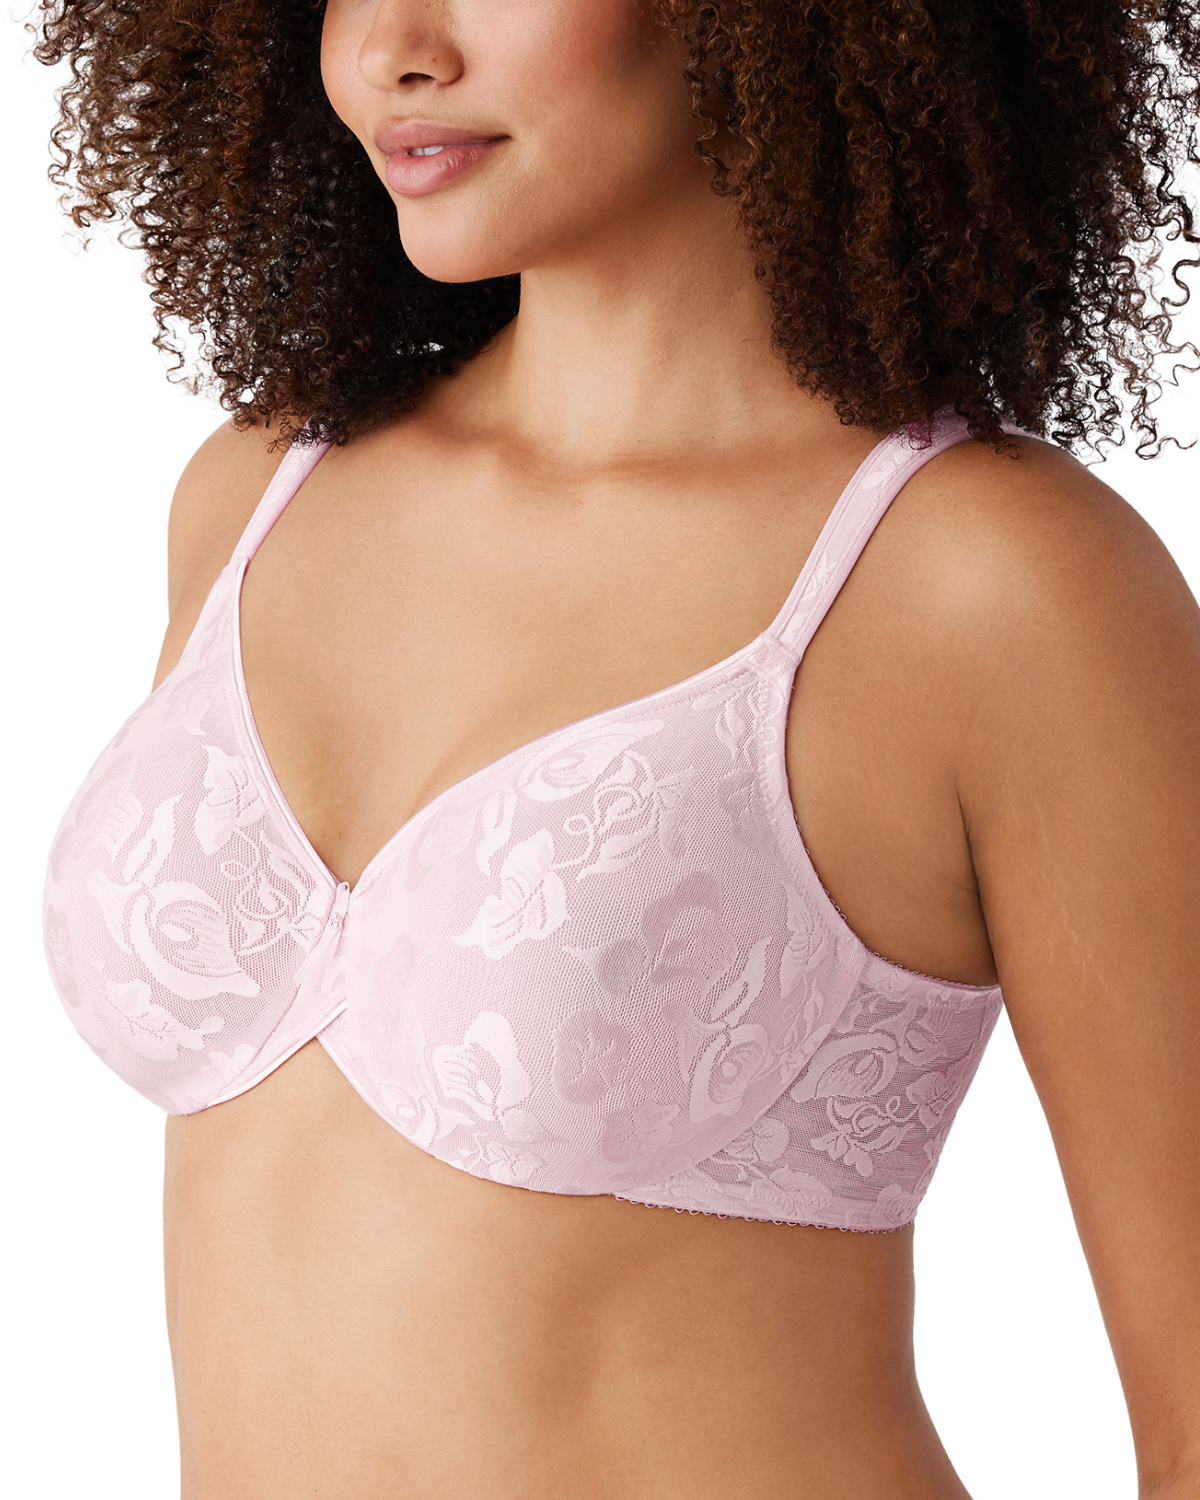 Model wearing a soft cup underwire bra in light pink